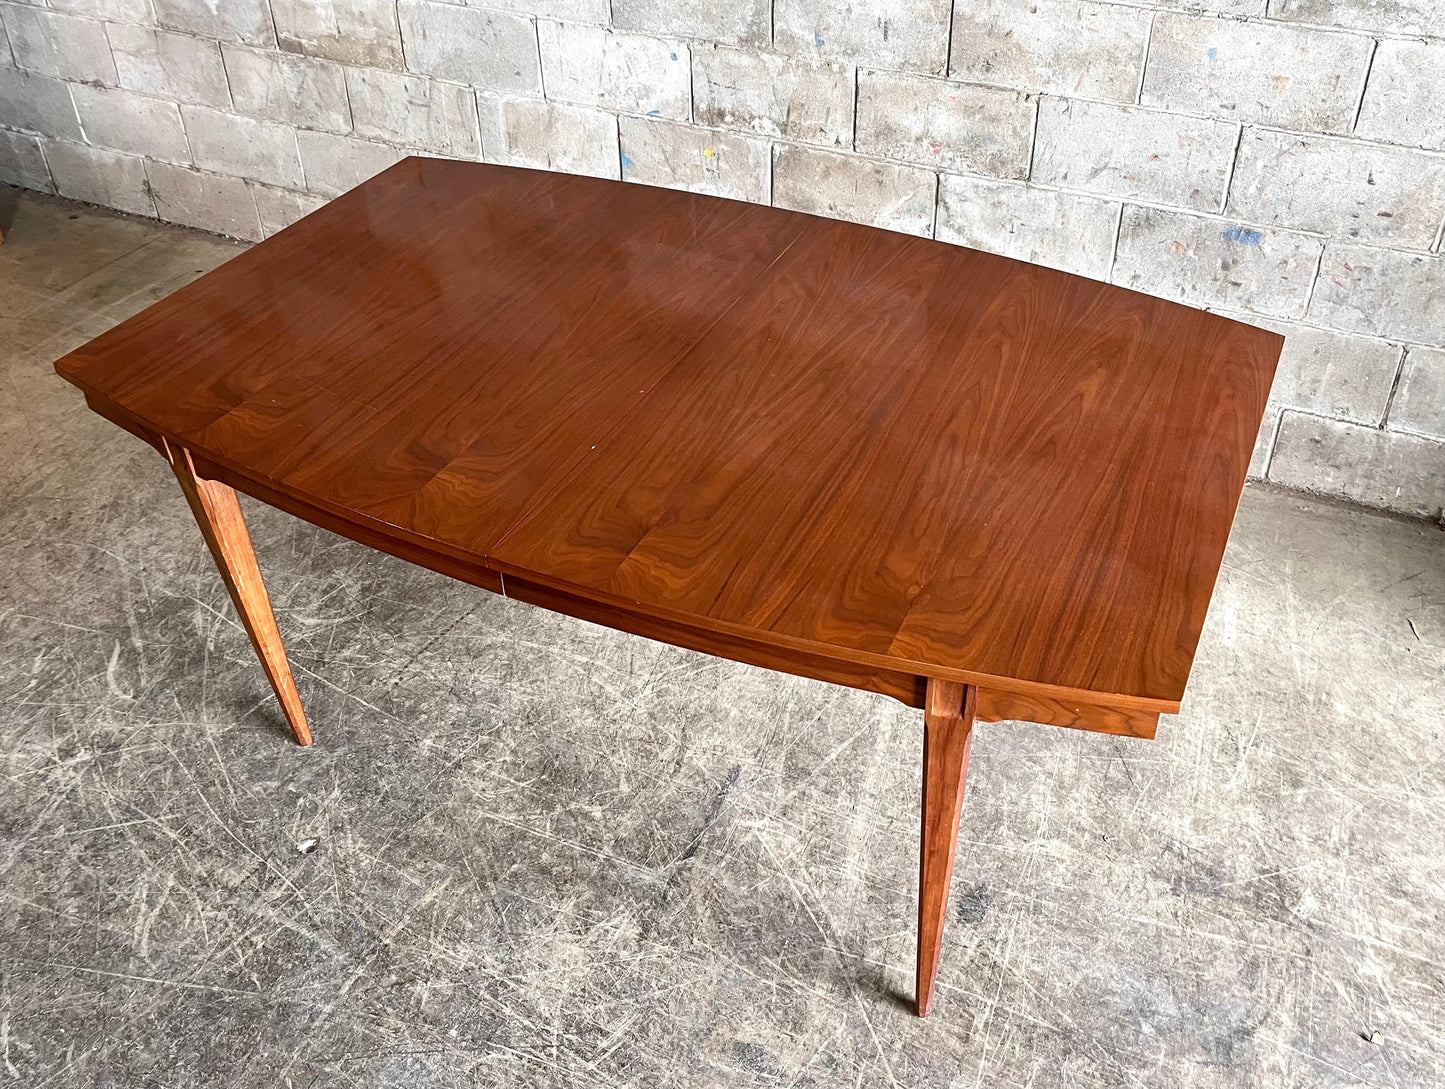 Striking Walnut Grain Detail - Young Manufacturing Vintage Mid Century Modern Dining Table from the 1960s